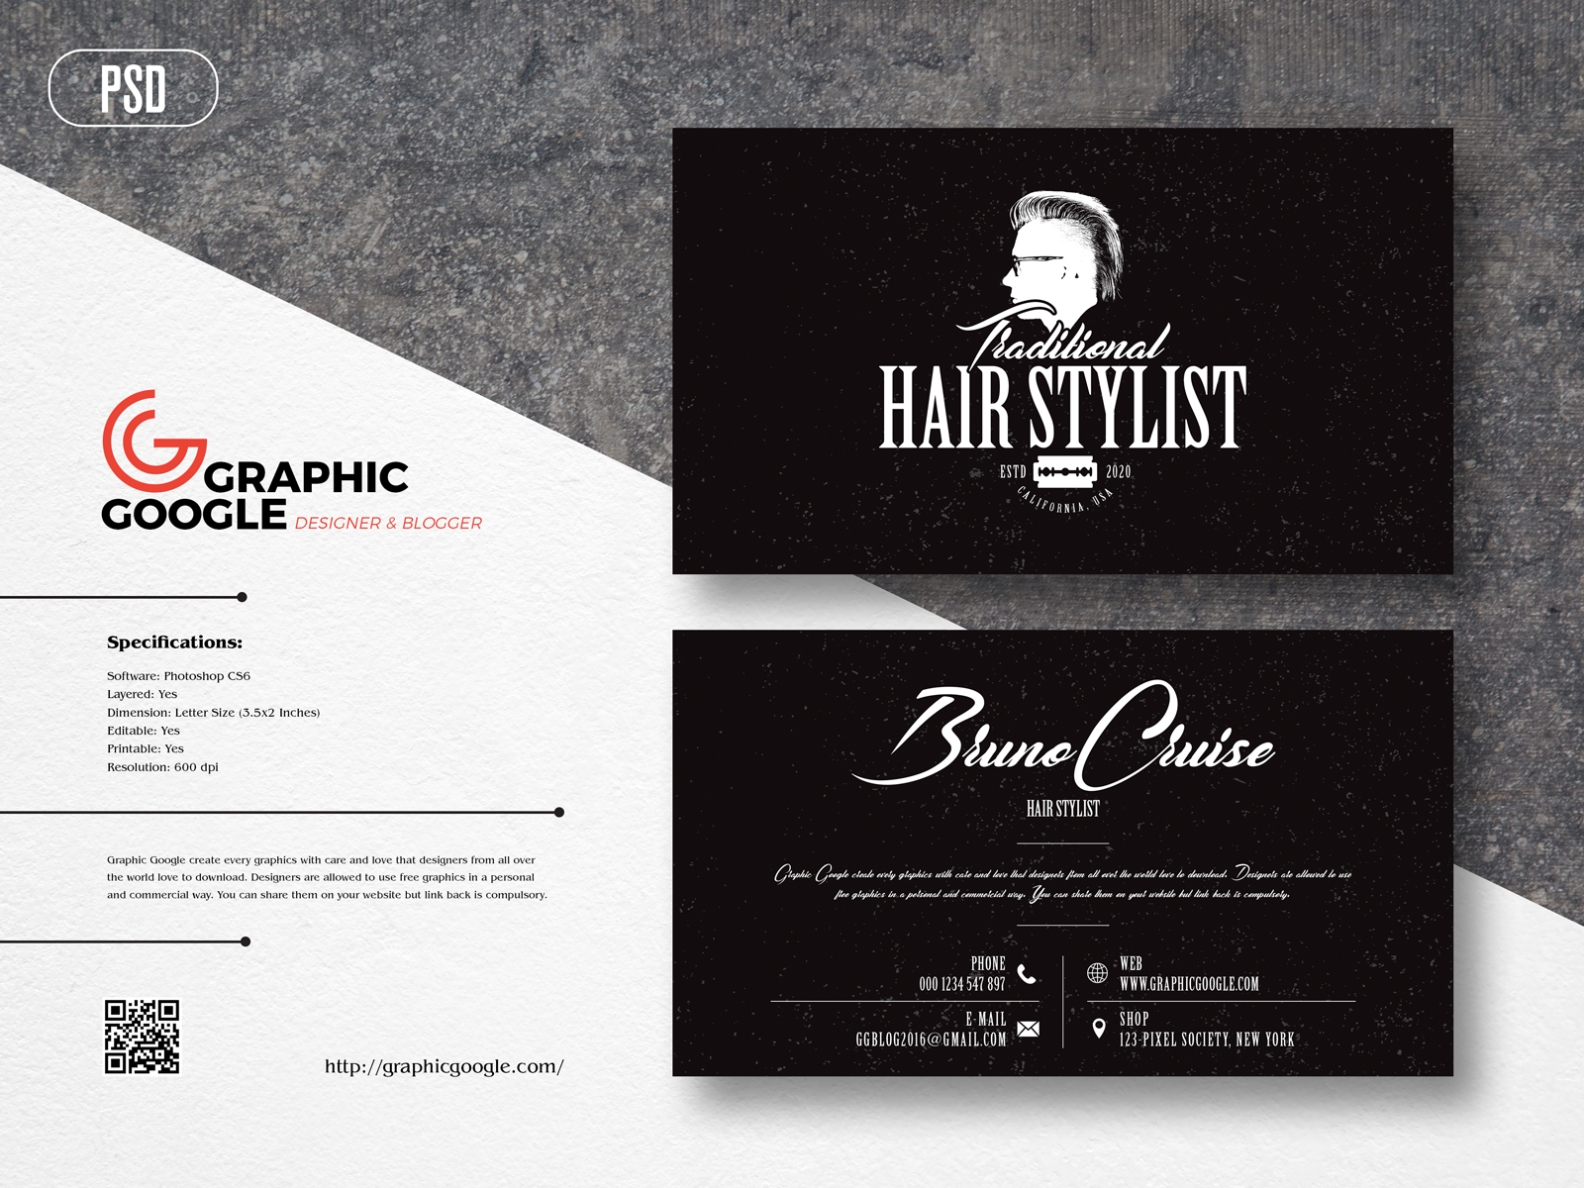 Free Hair Stylist Business Card Design Template By Graphic Google On In Google Search Business Card Template